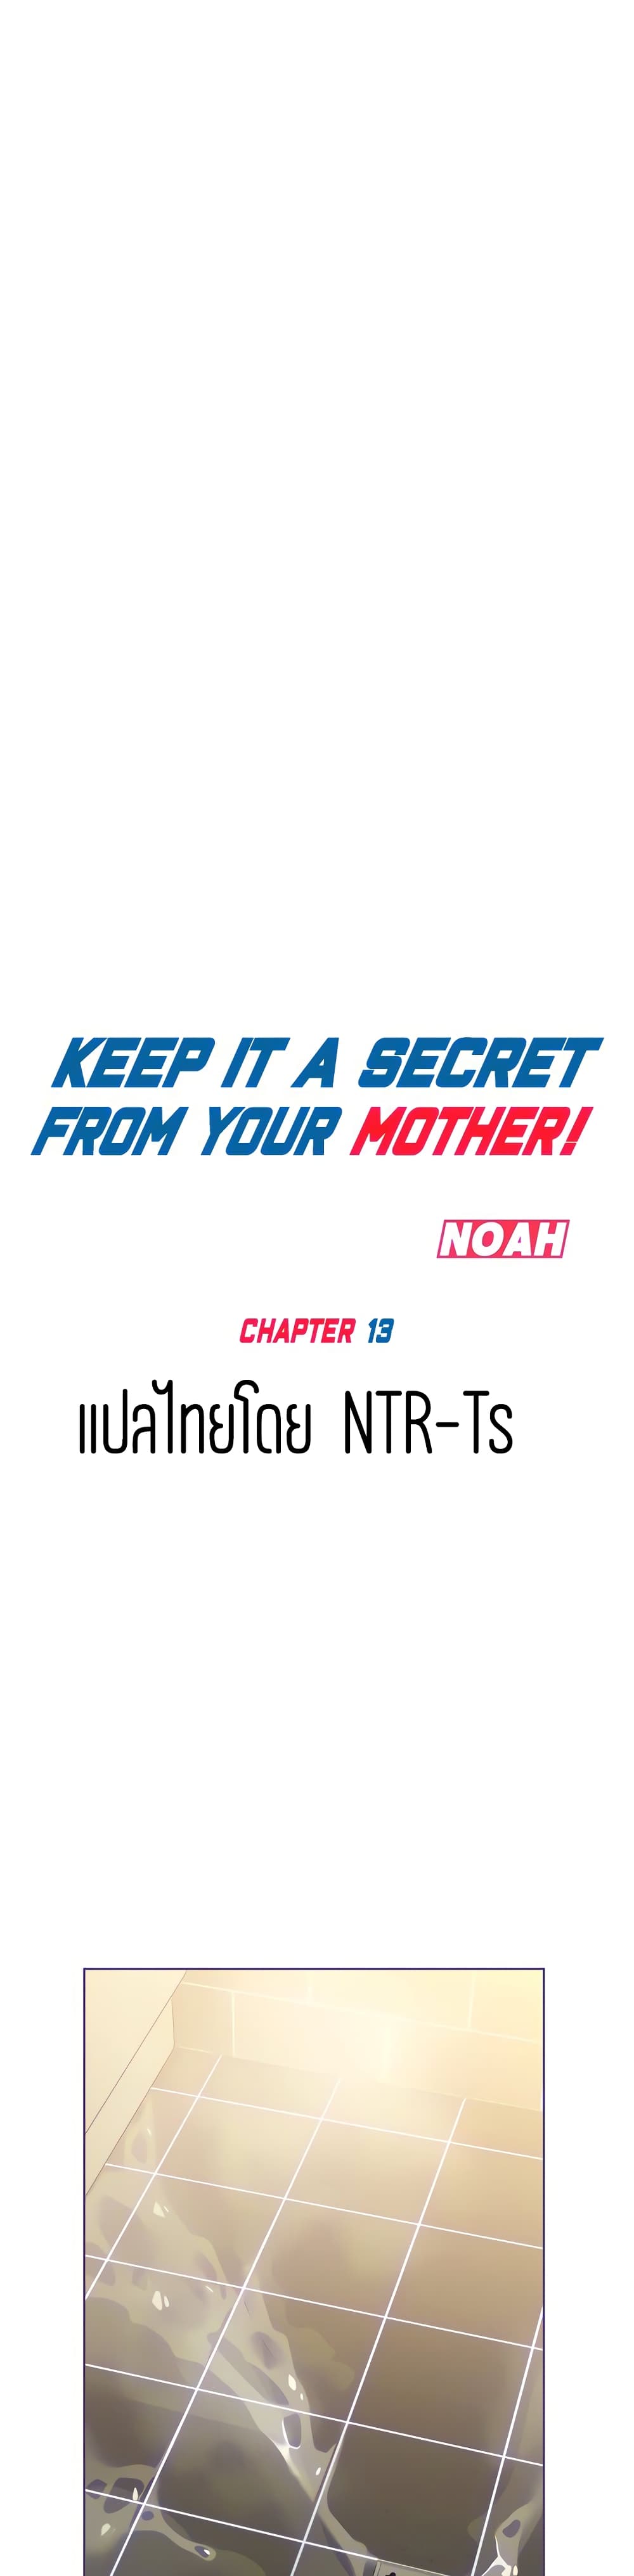 Keep it A Secret from Your Mother! 13 (21)